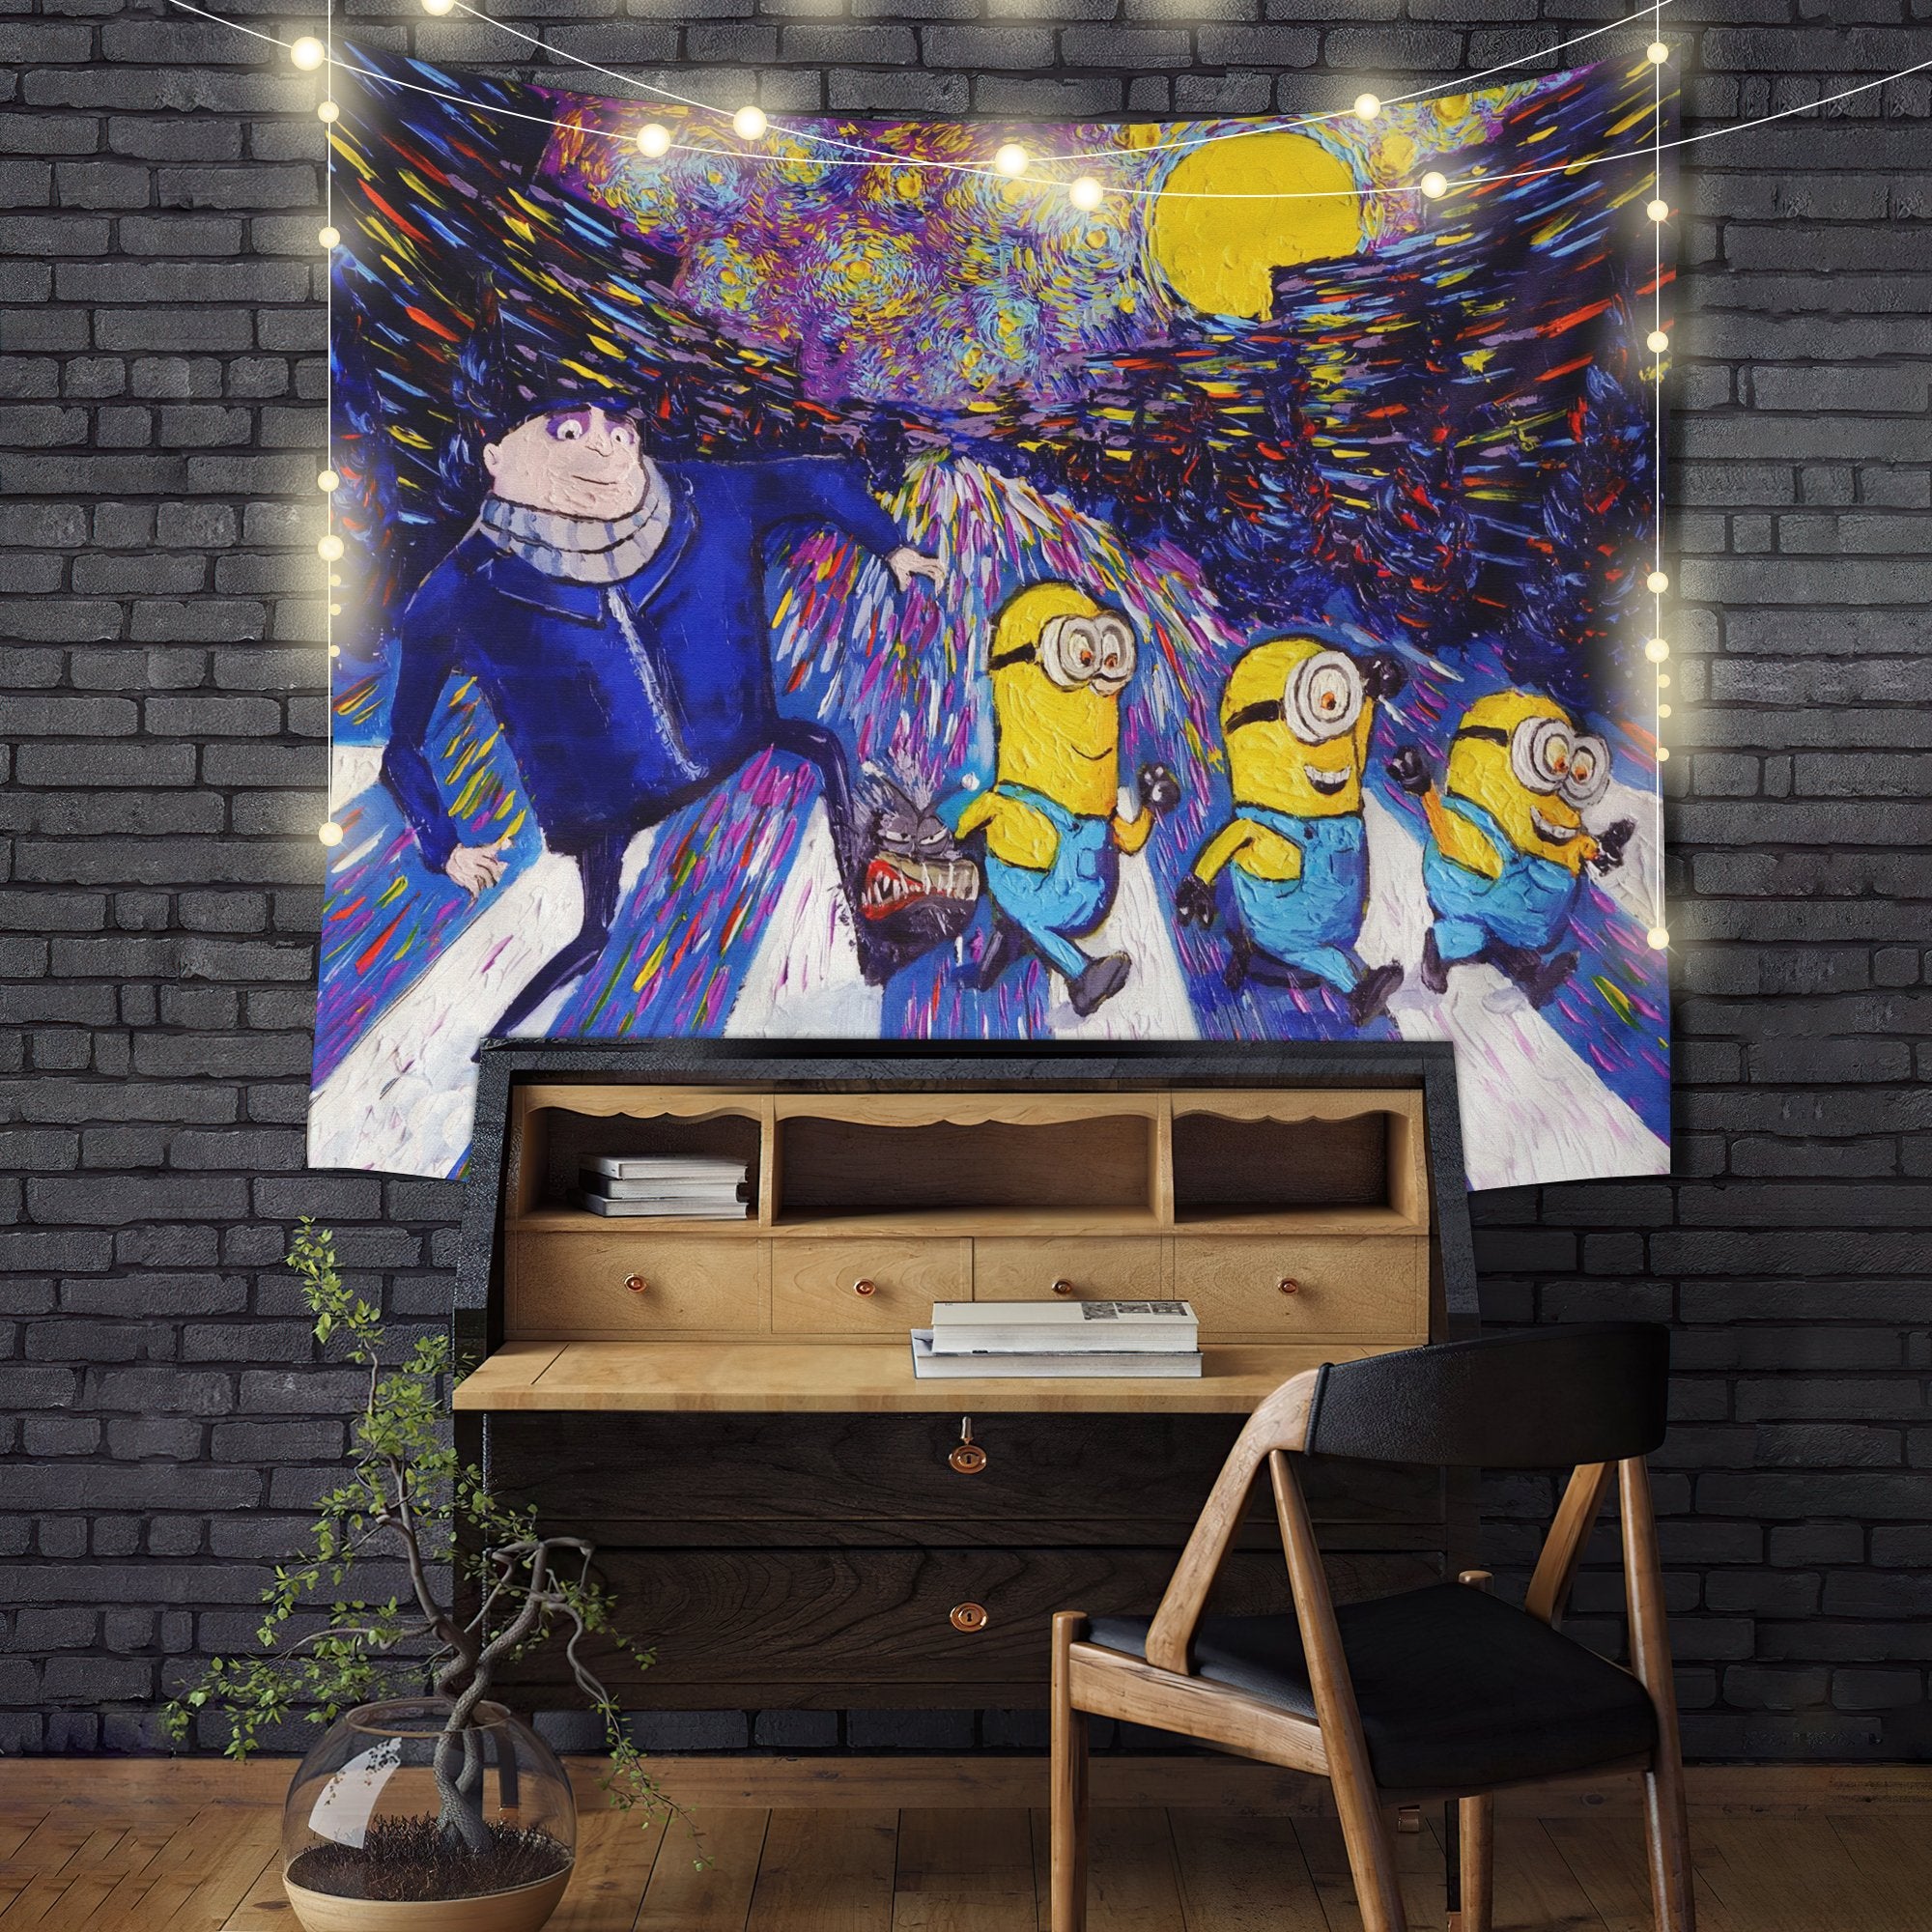 Starry Night Despicable Me Minions Tapestry Room Decor